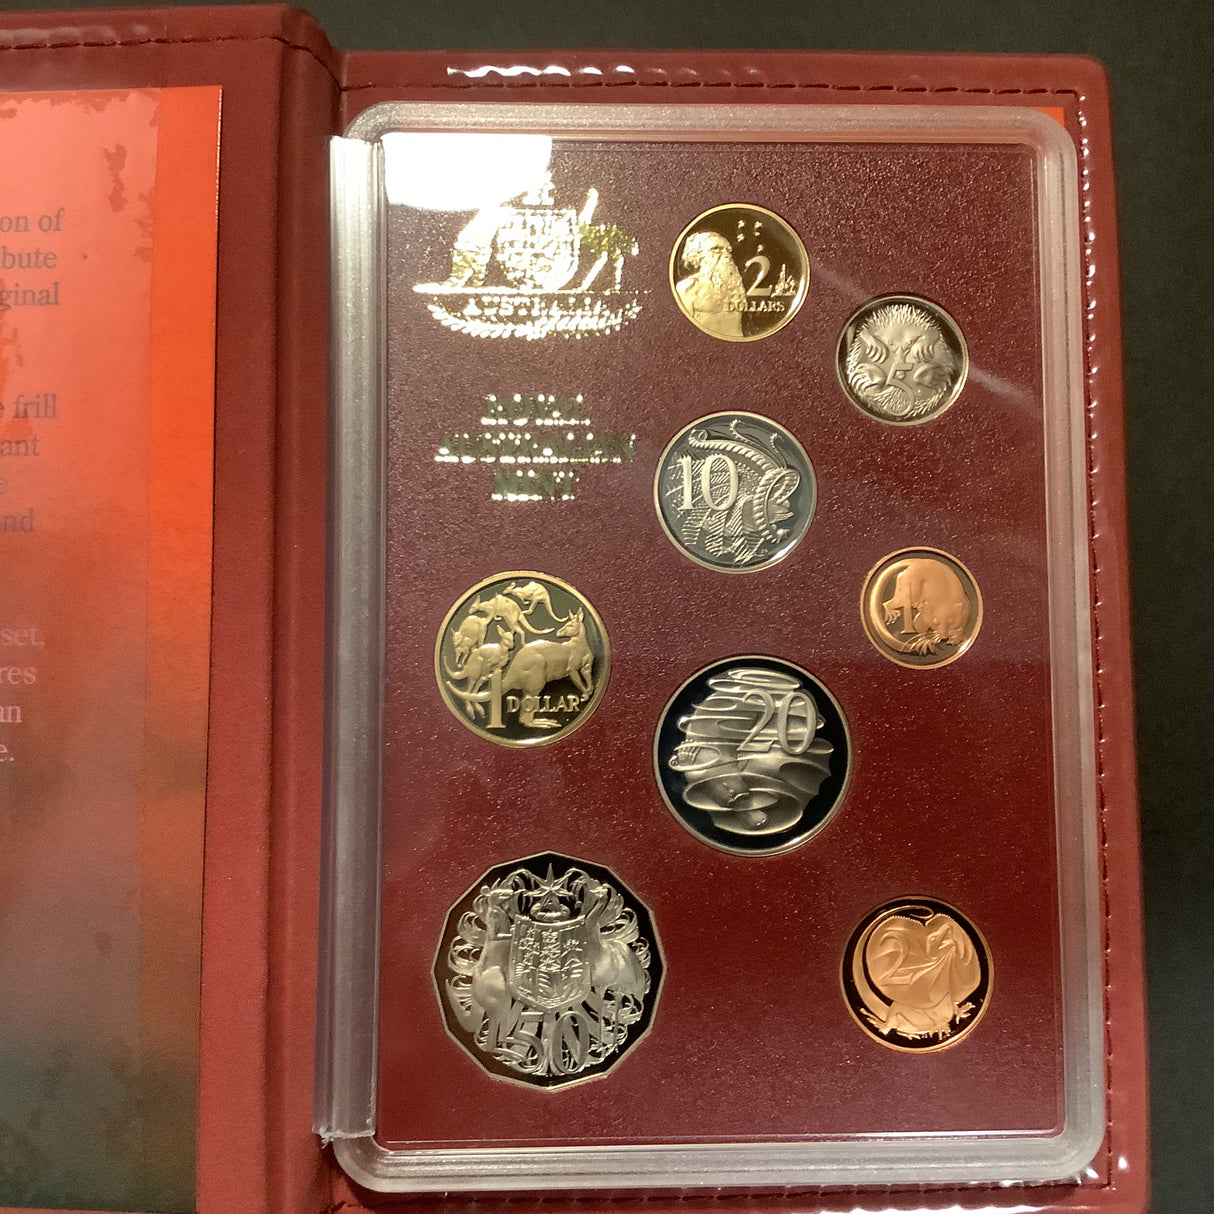 1989 8 Coin RAM issued Proof Set.